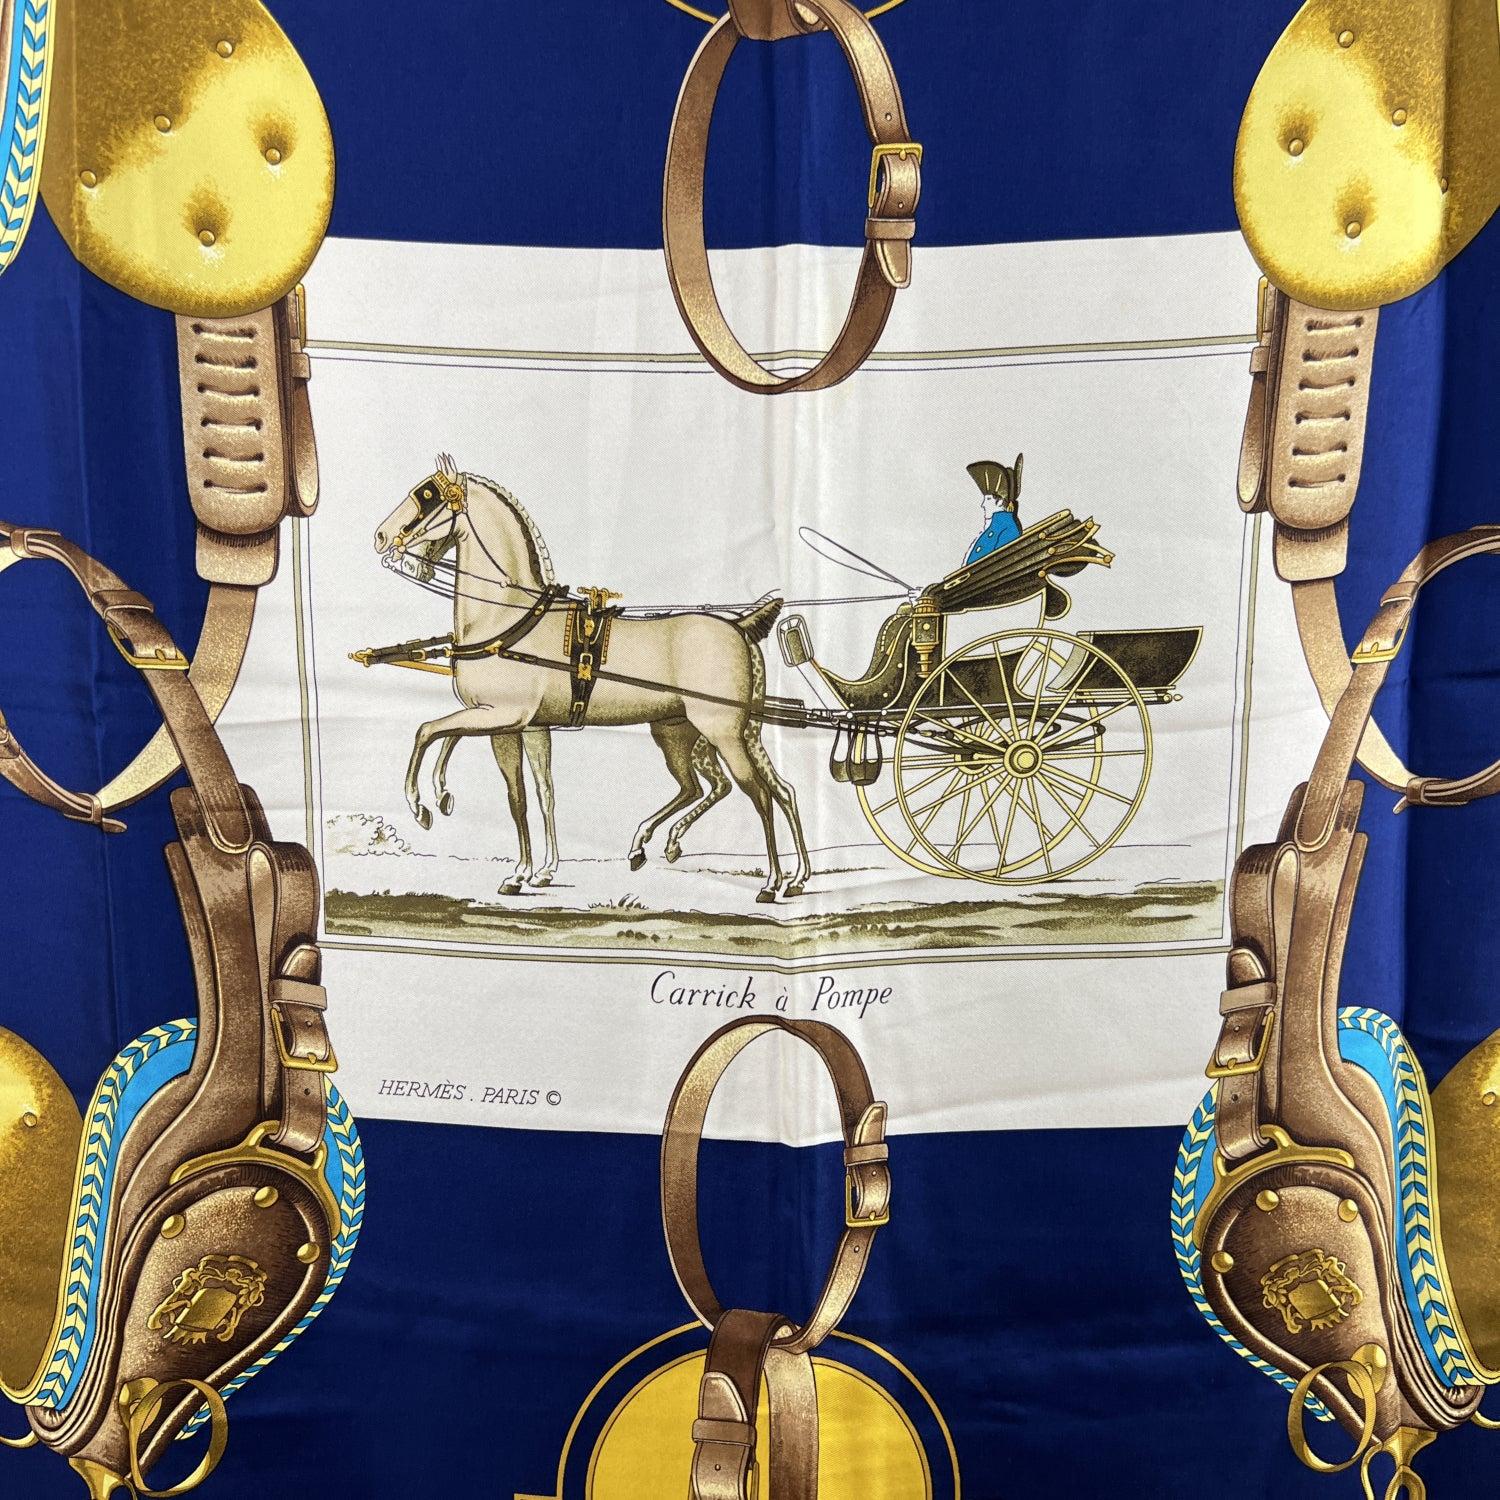 Hermes Paris Vintage Silk Scarf Carrick a Pompe 1975 Latham In Good Condition For Sale In Rome, Rome